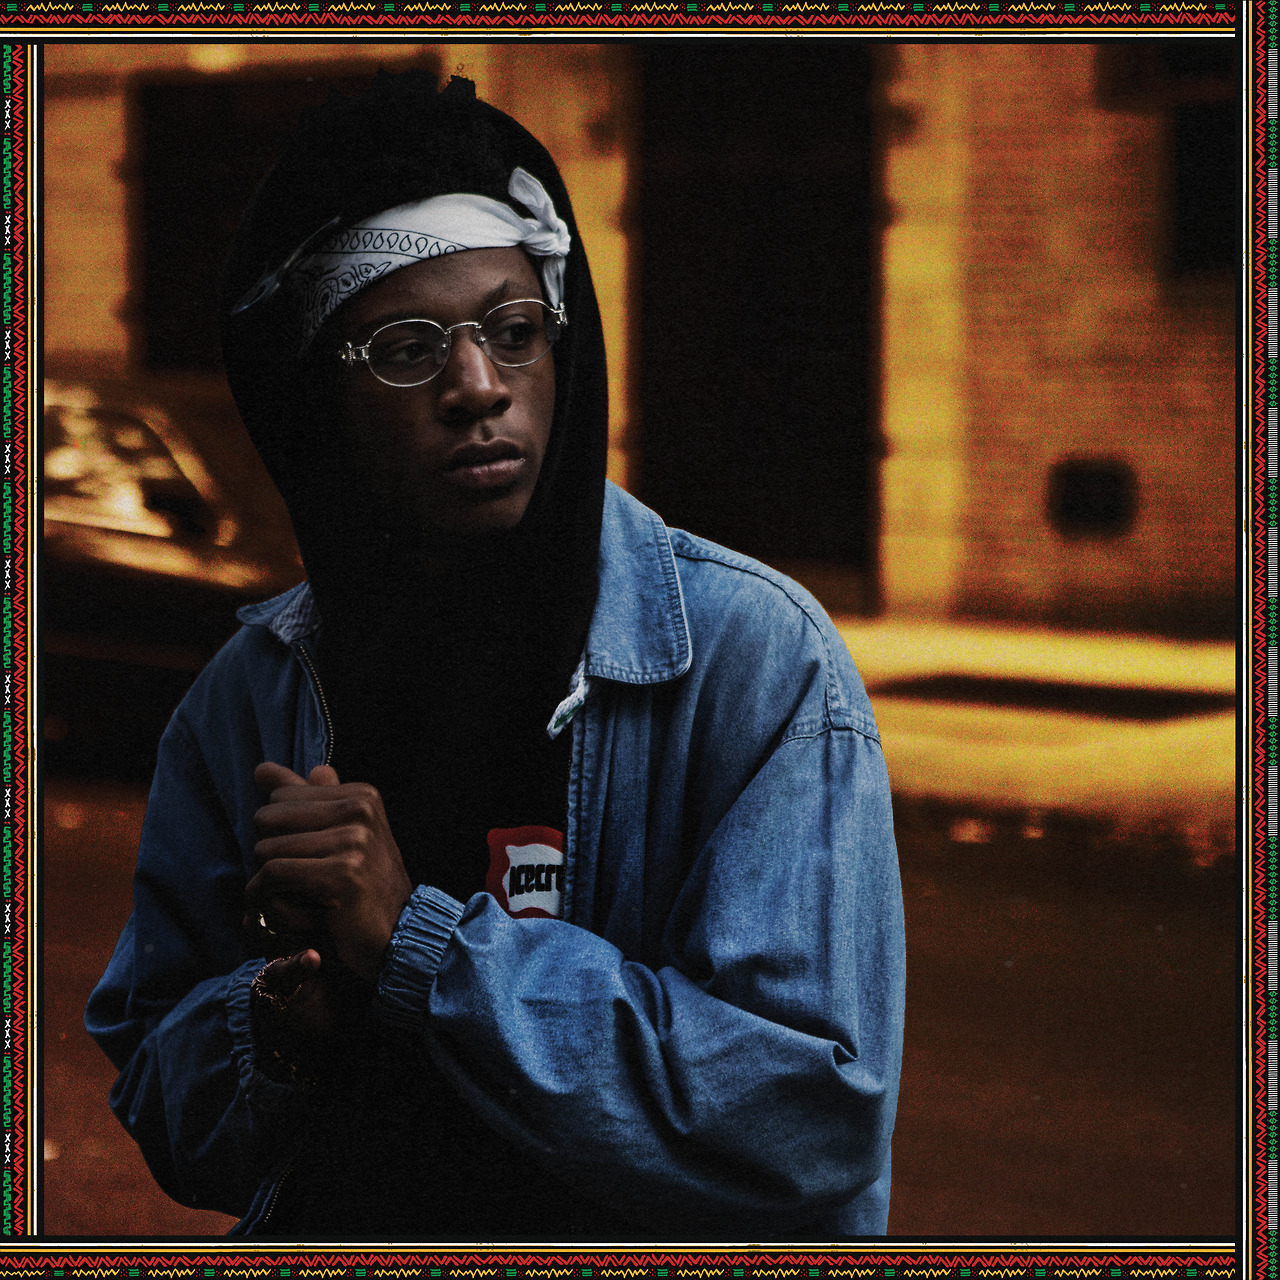 35 Joey Badass Record Label - Labels Database 2020